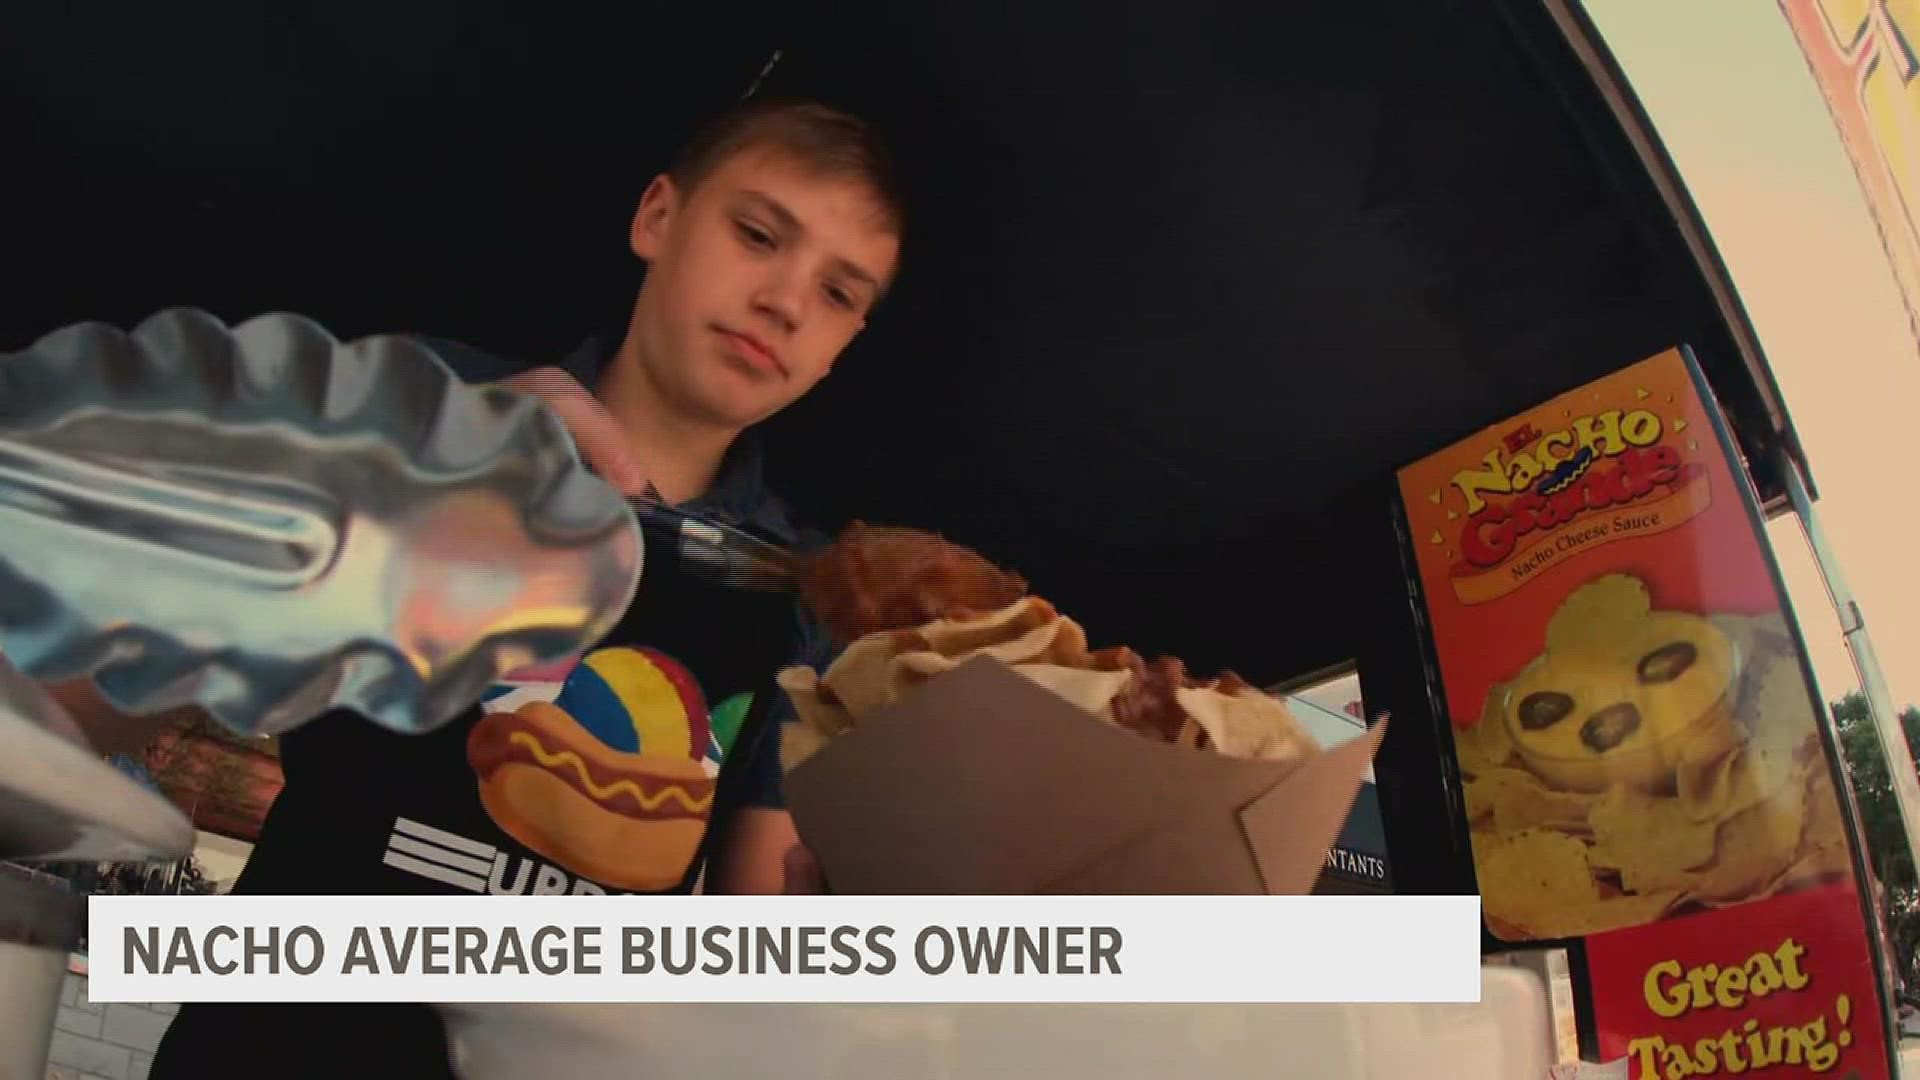 Bo Haubrich, a 14-year-old entrepreneur, started a mobile food stand where he sells nachos, hot dogs and snow cones.